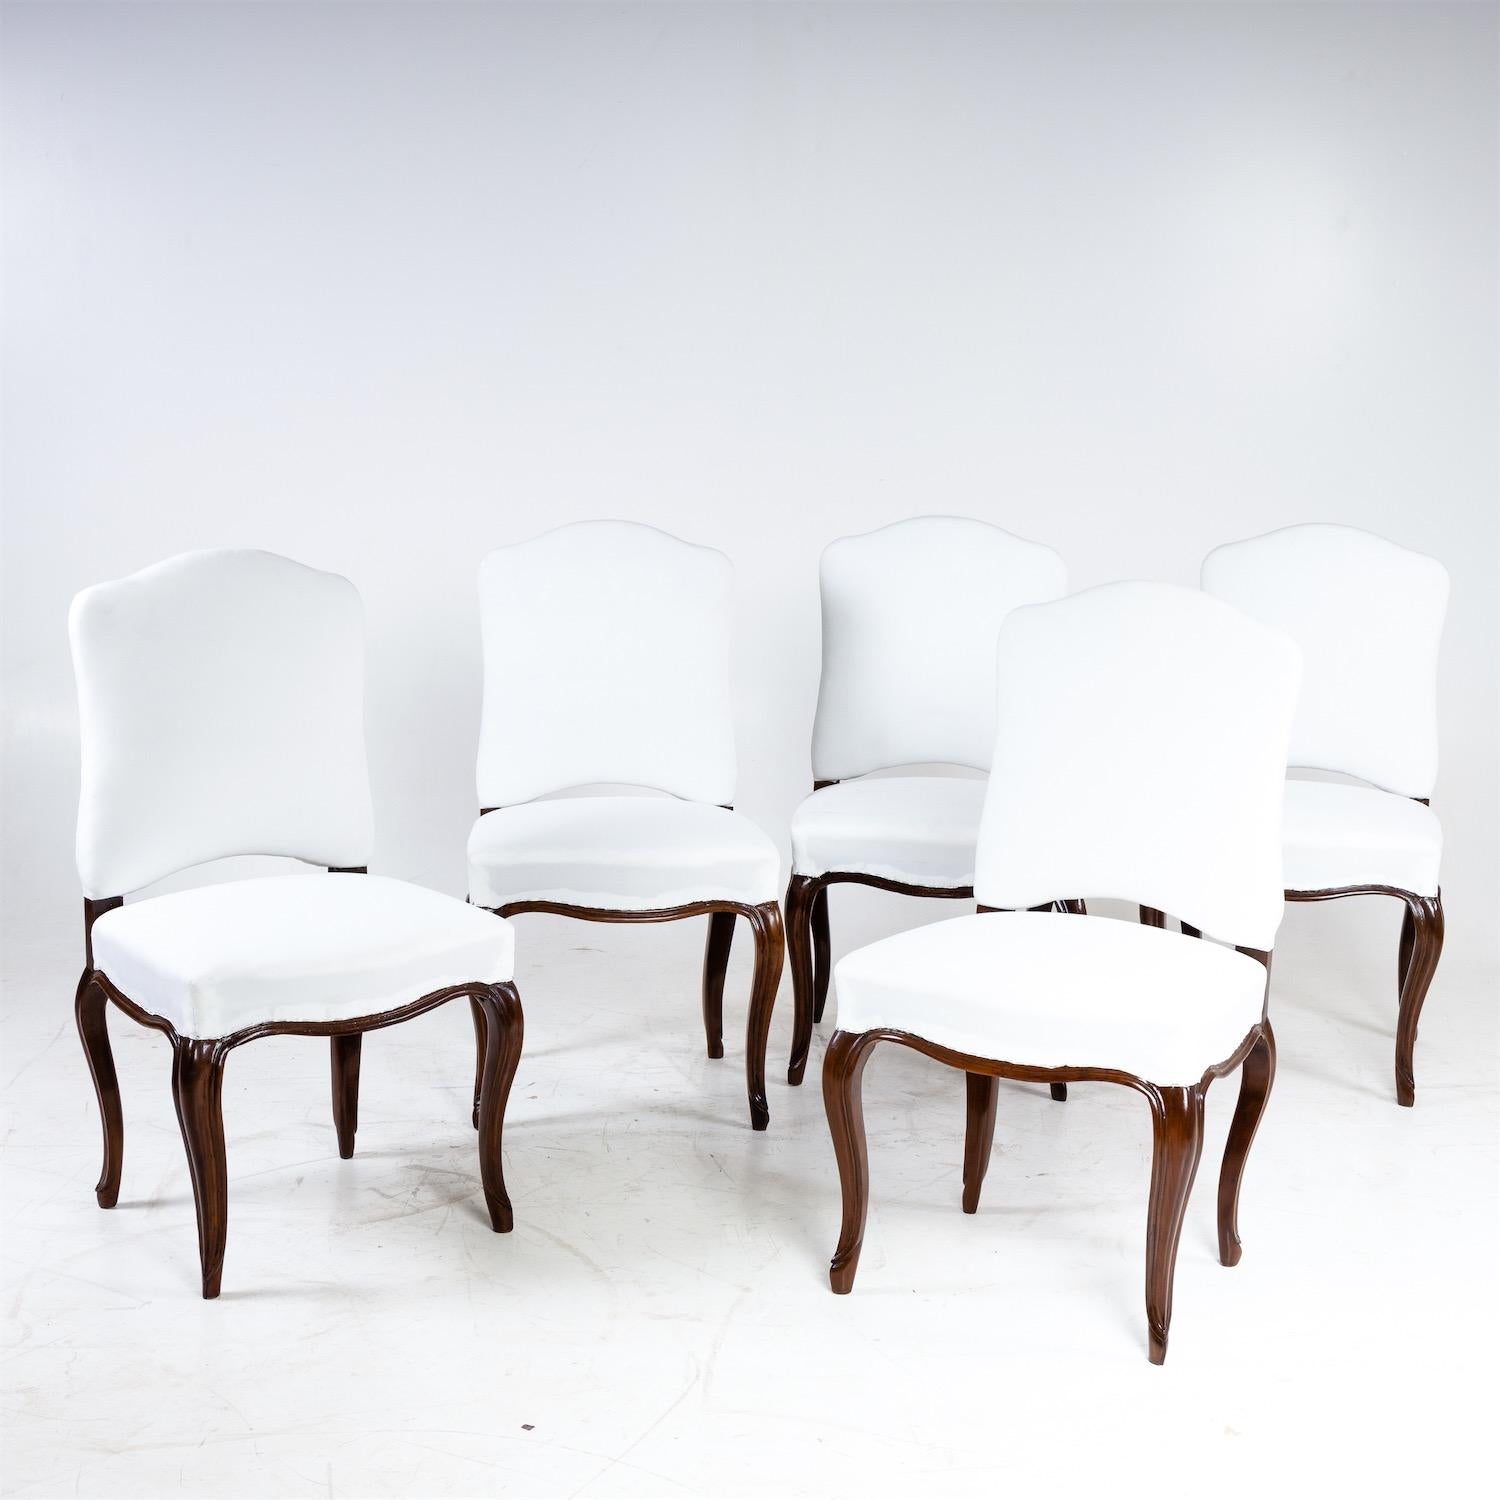 Set of Five Italian Baroque Chairs, 18th Century In Good Condition For Sale In Greding, DE